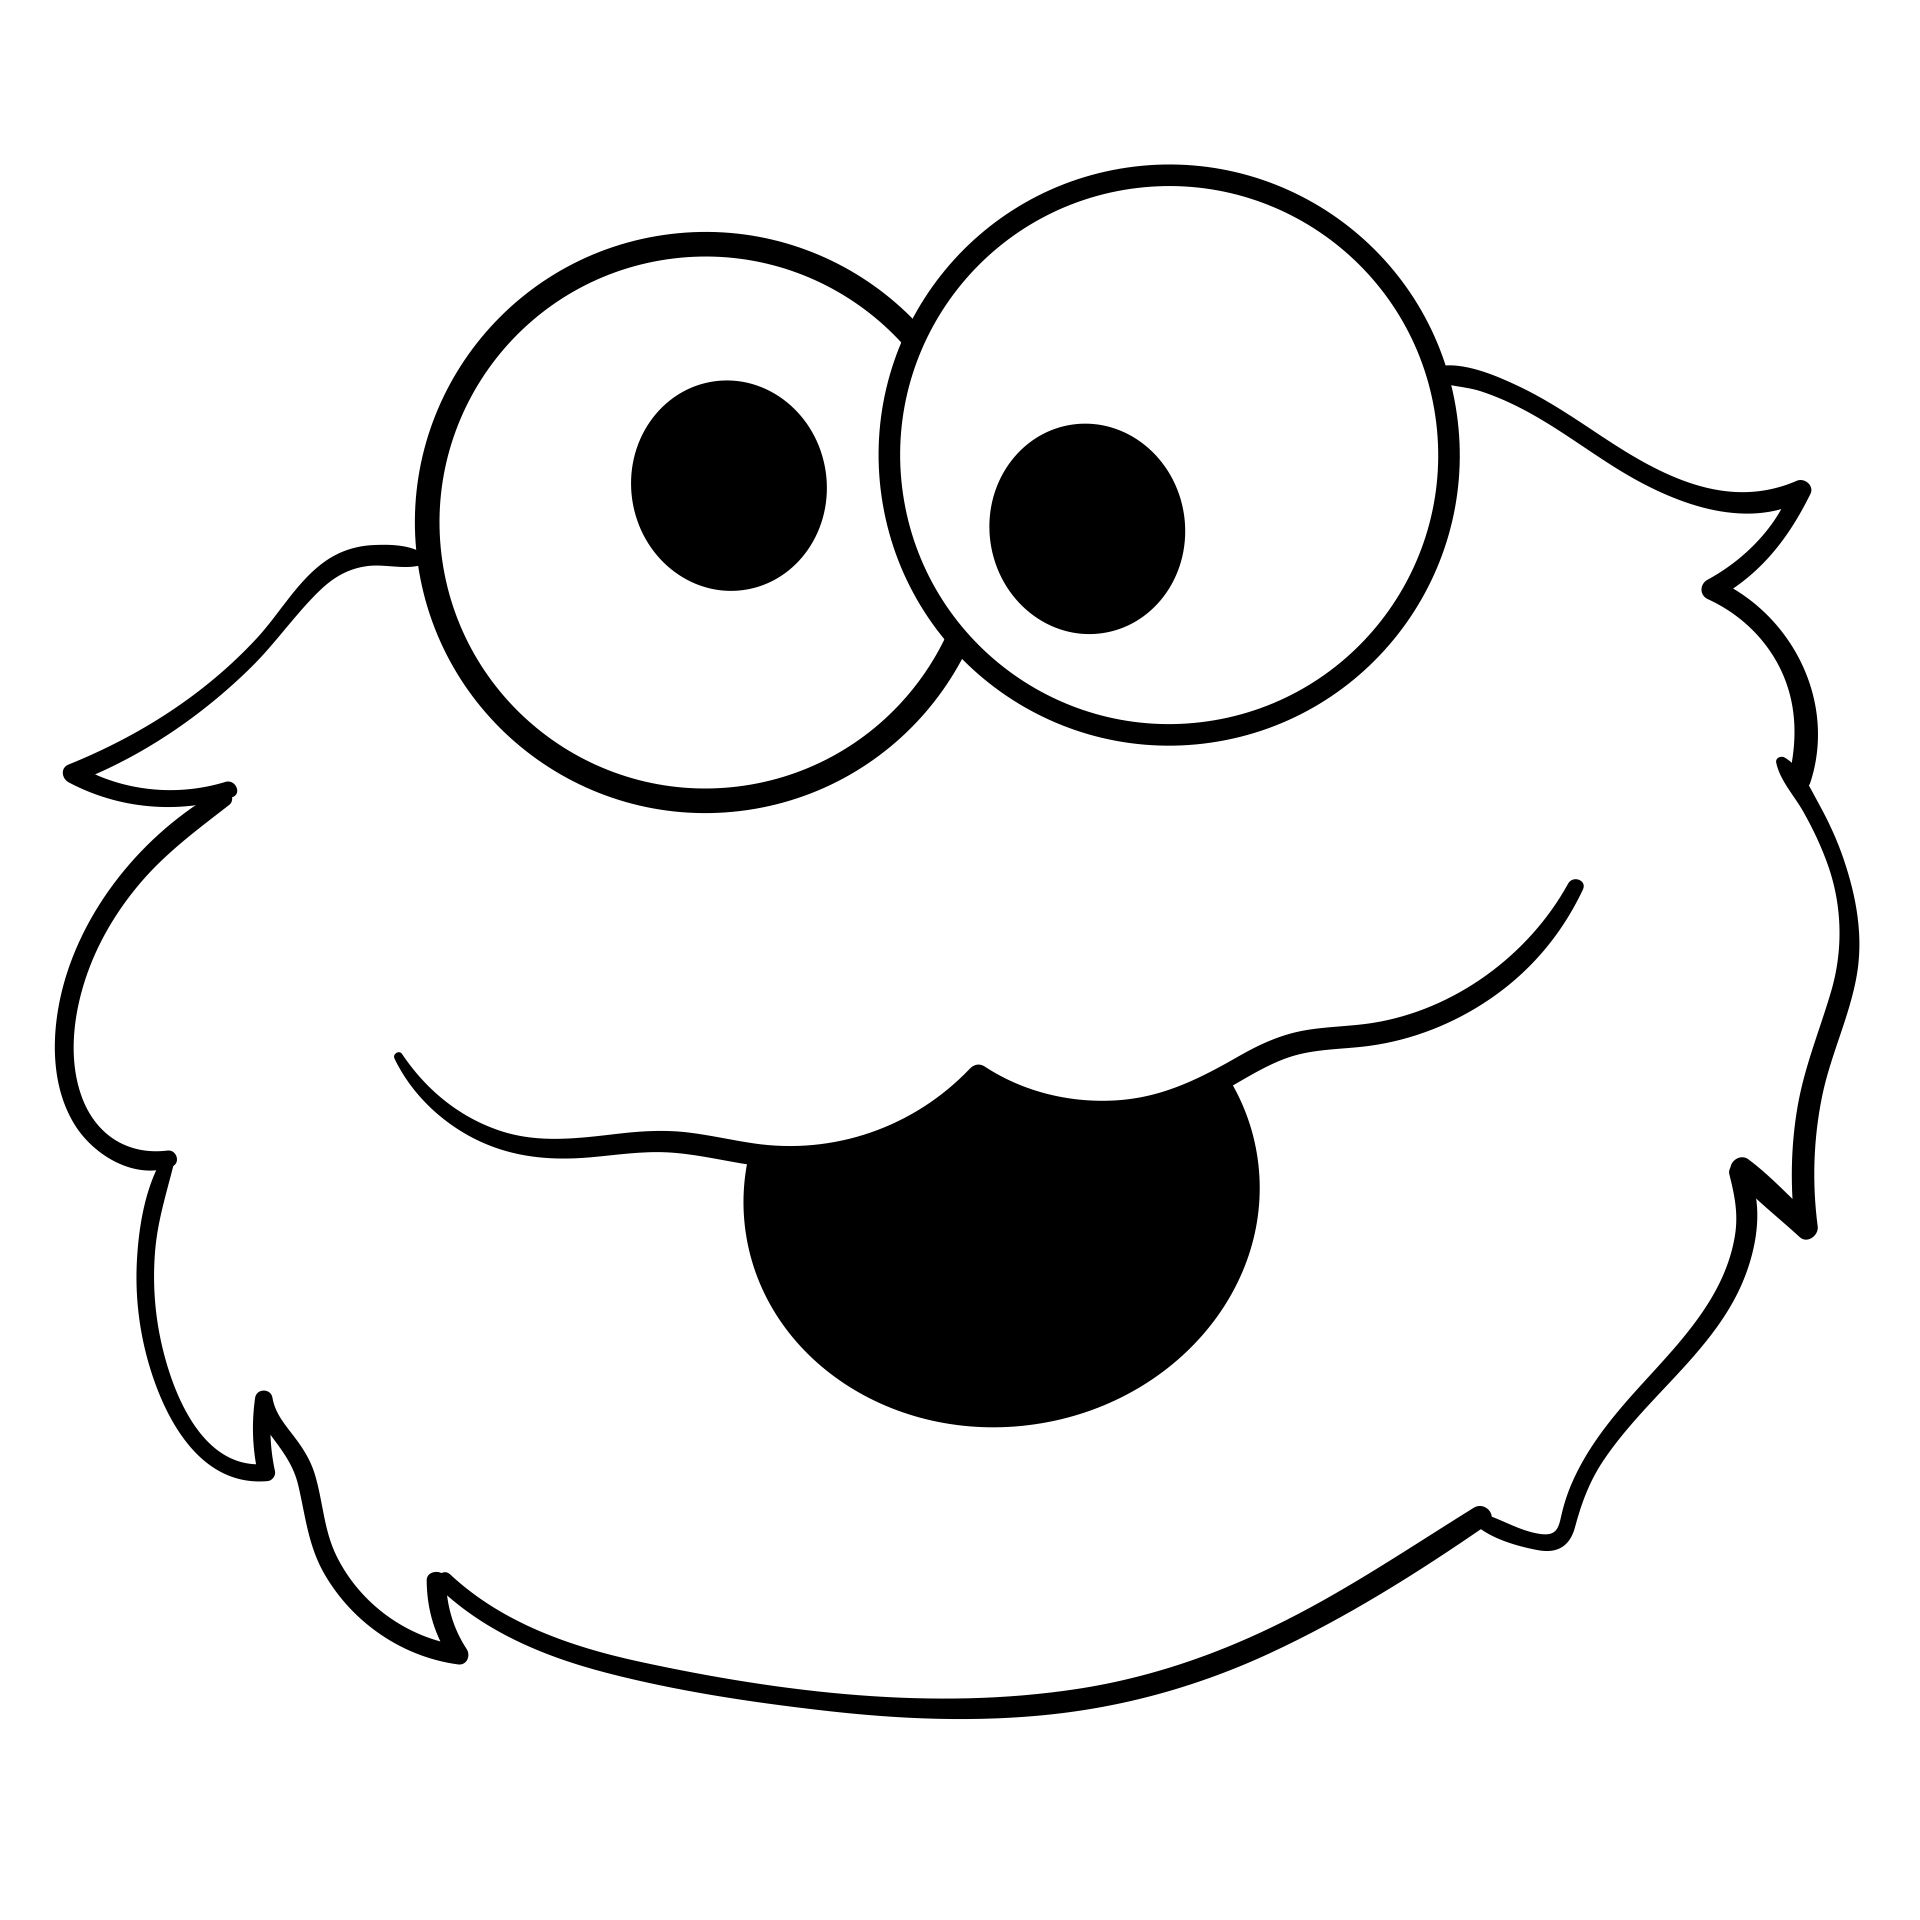 cookie-monster-face-template-printable-printable-templates